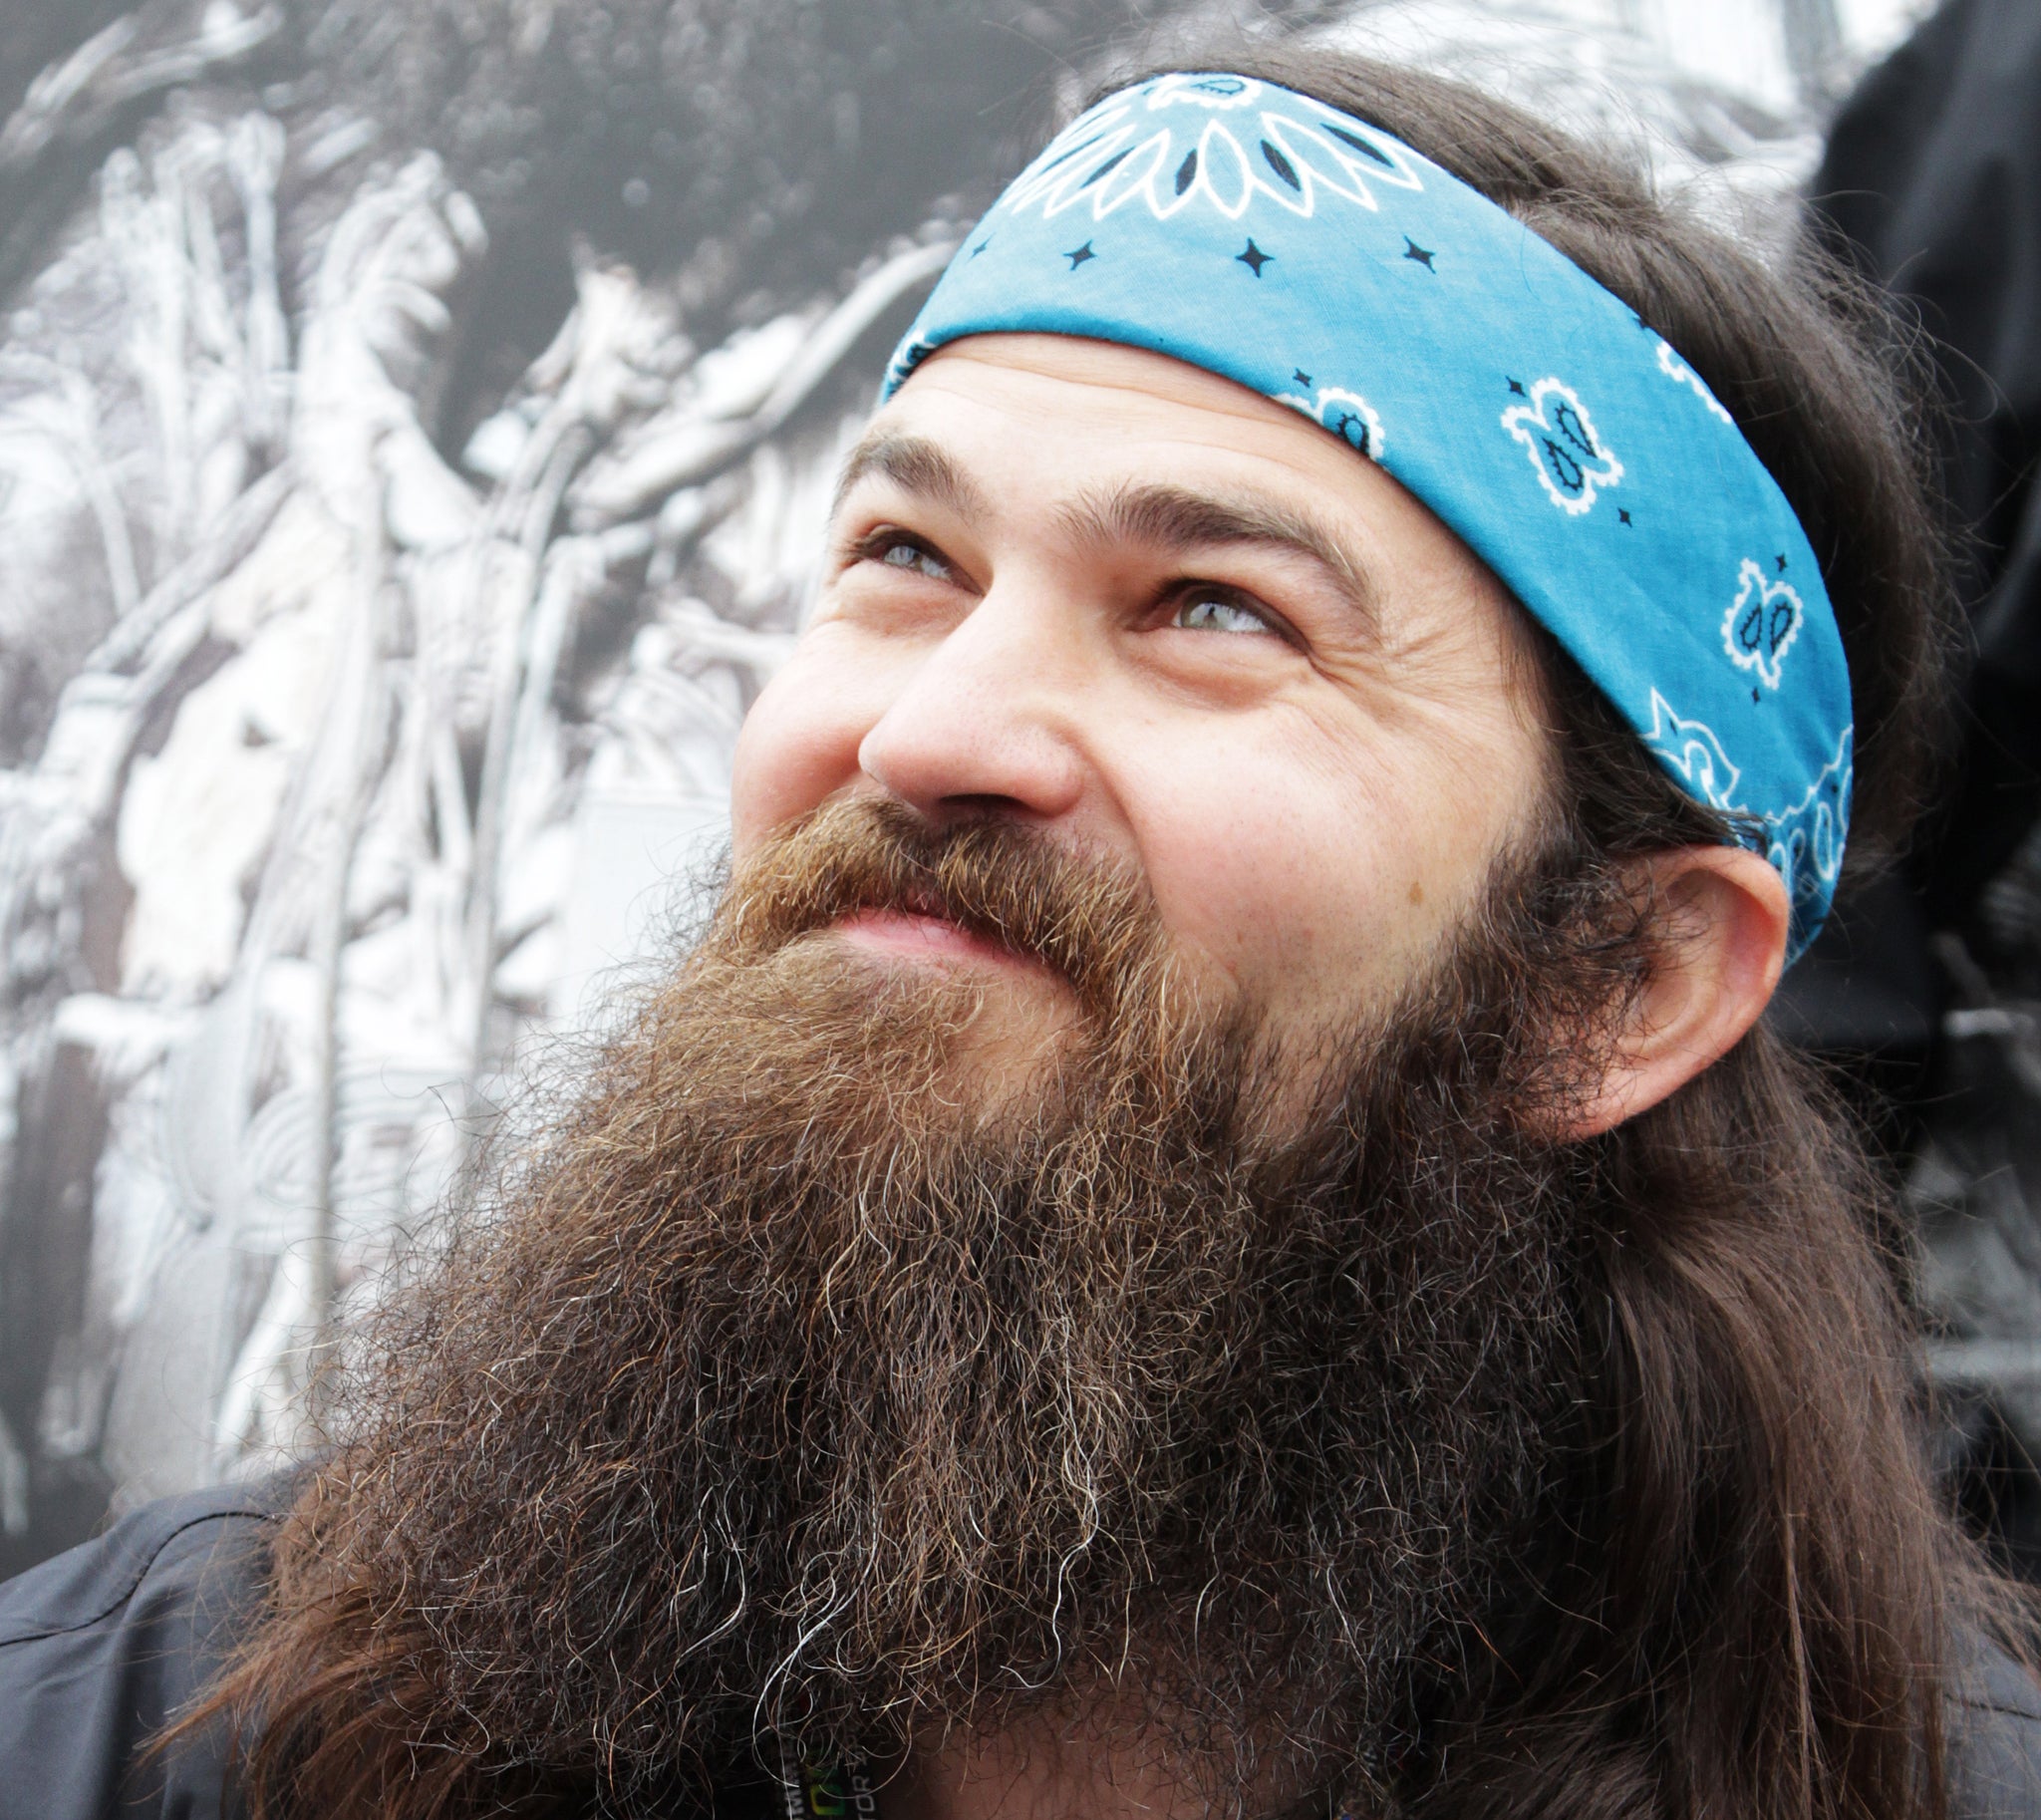 Jep Robertson has confirmed he is well after suffering a seizure